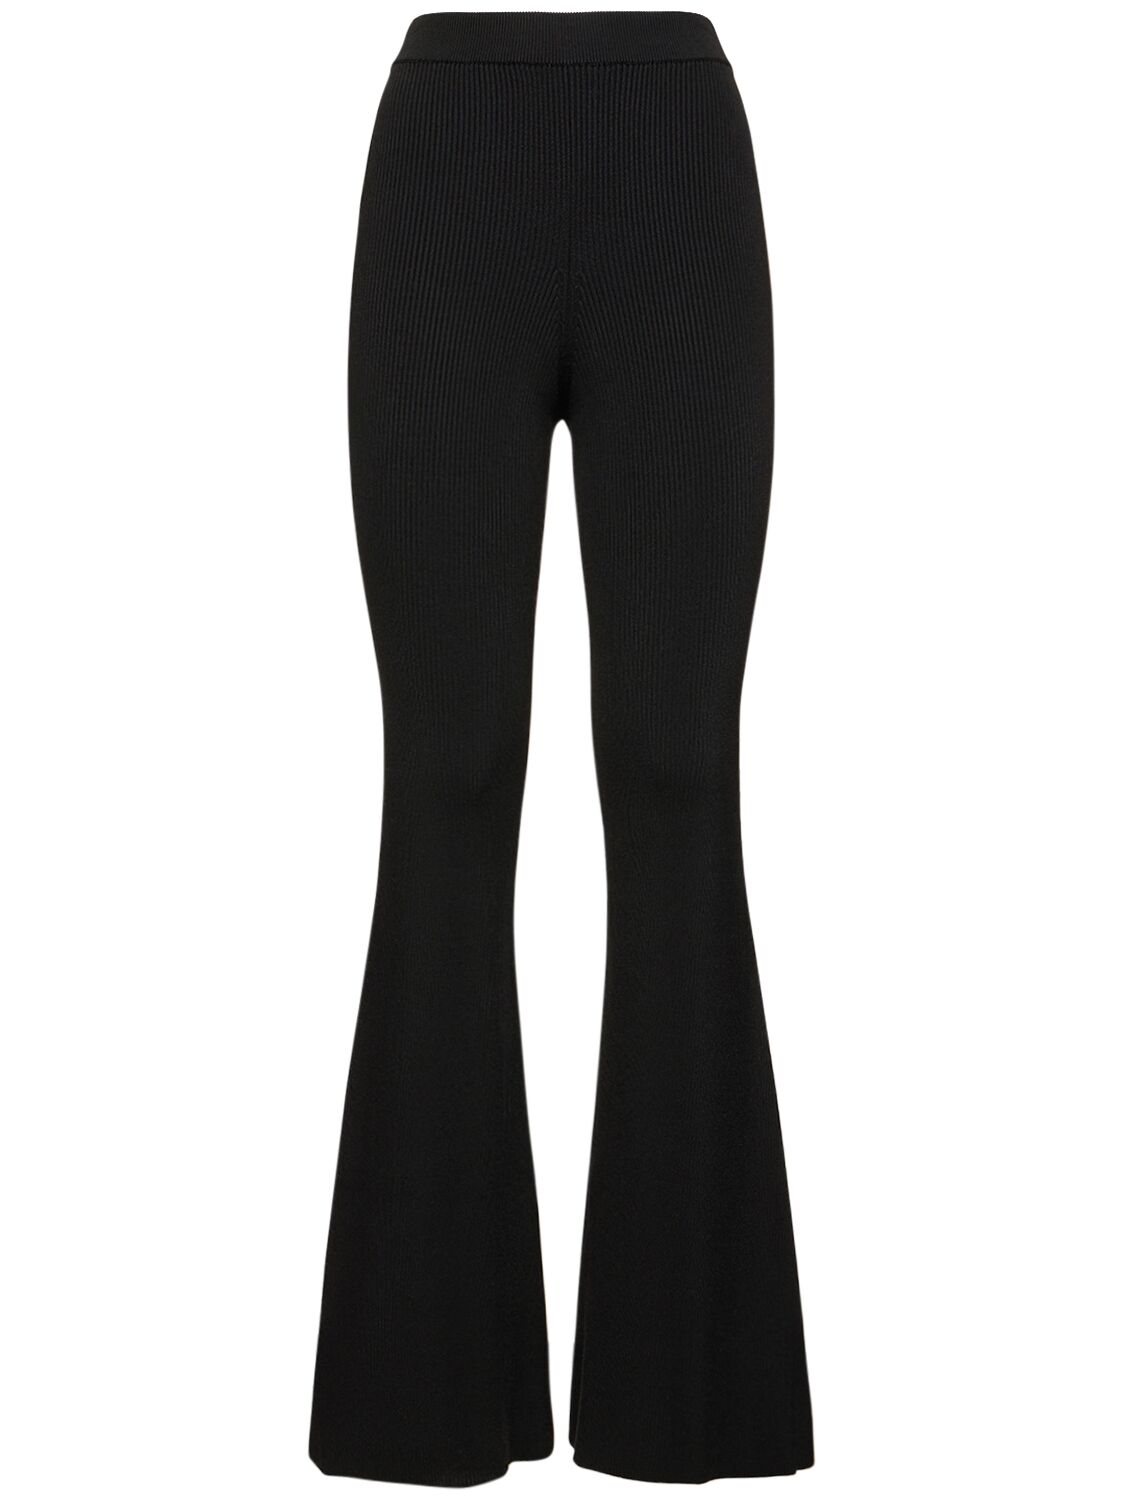 Image of Compact Knit Technical Flared Pants